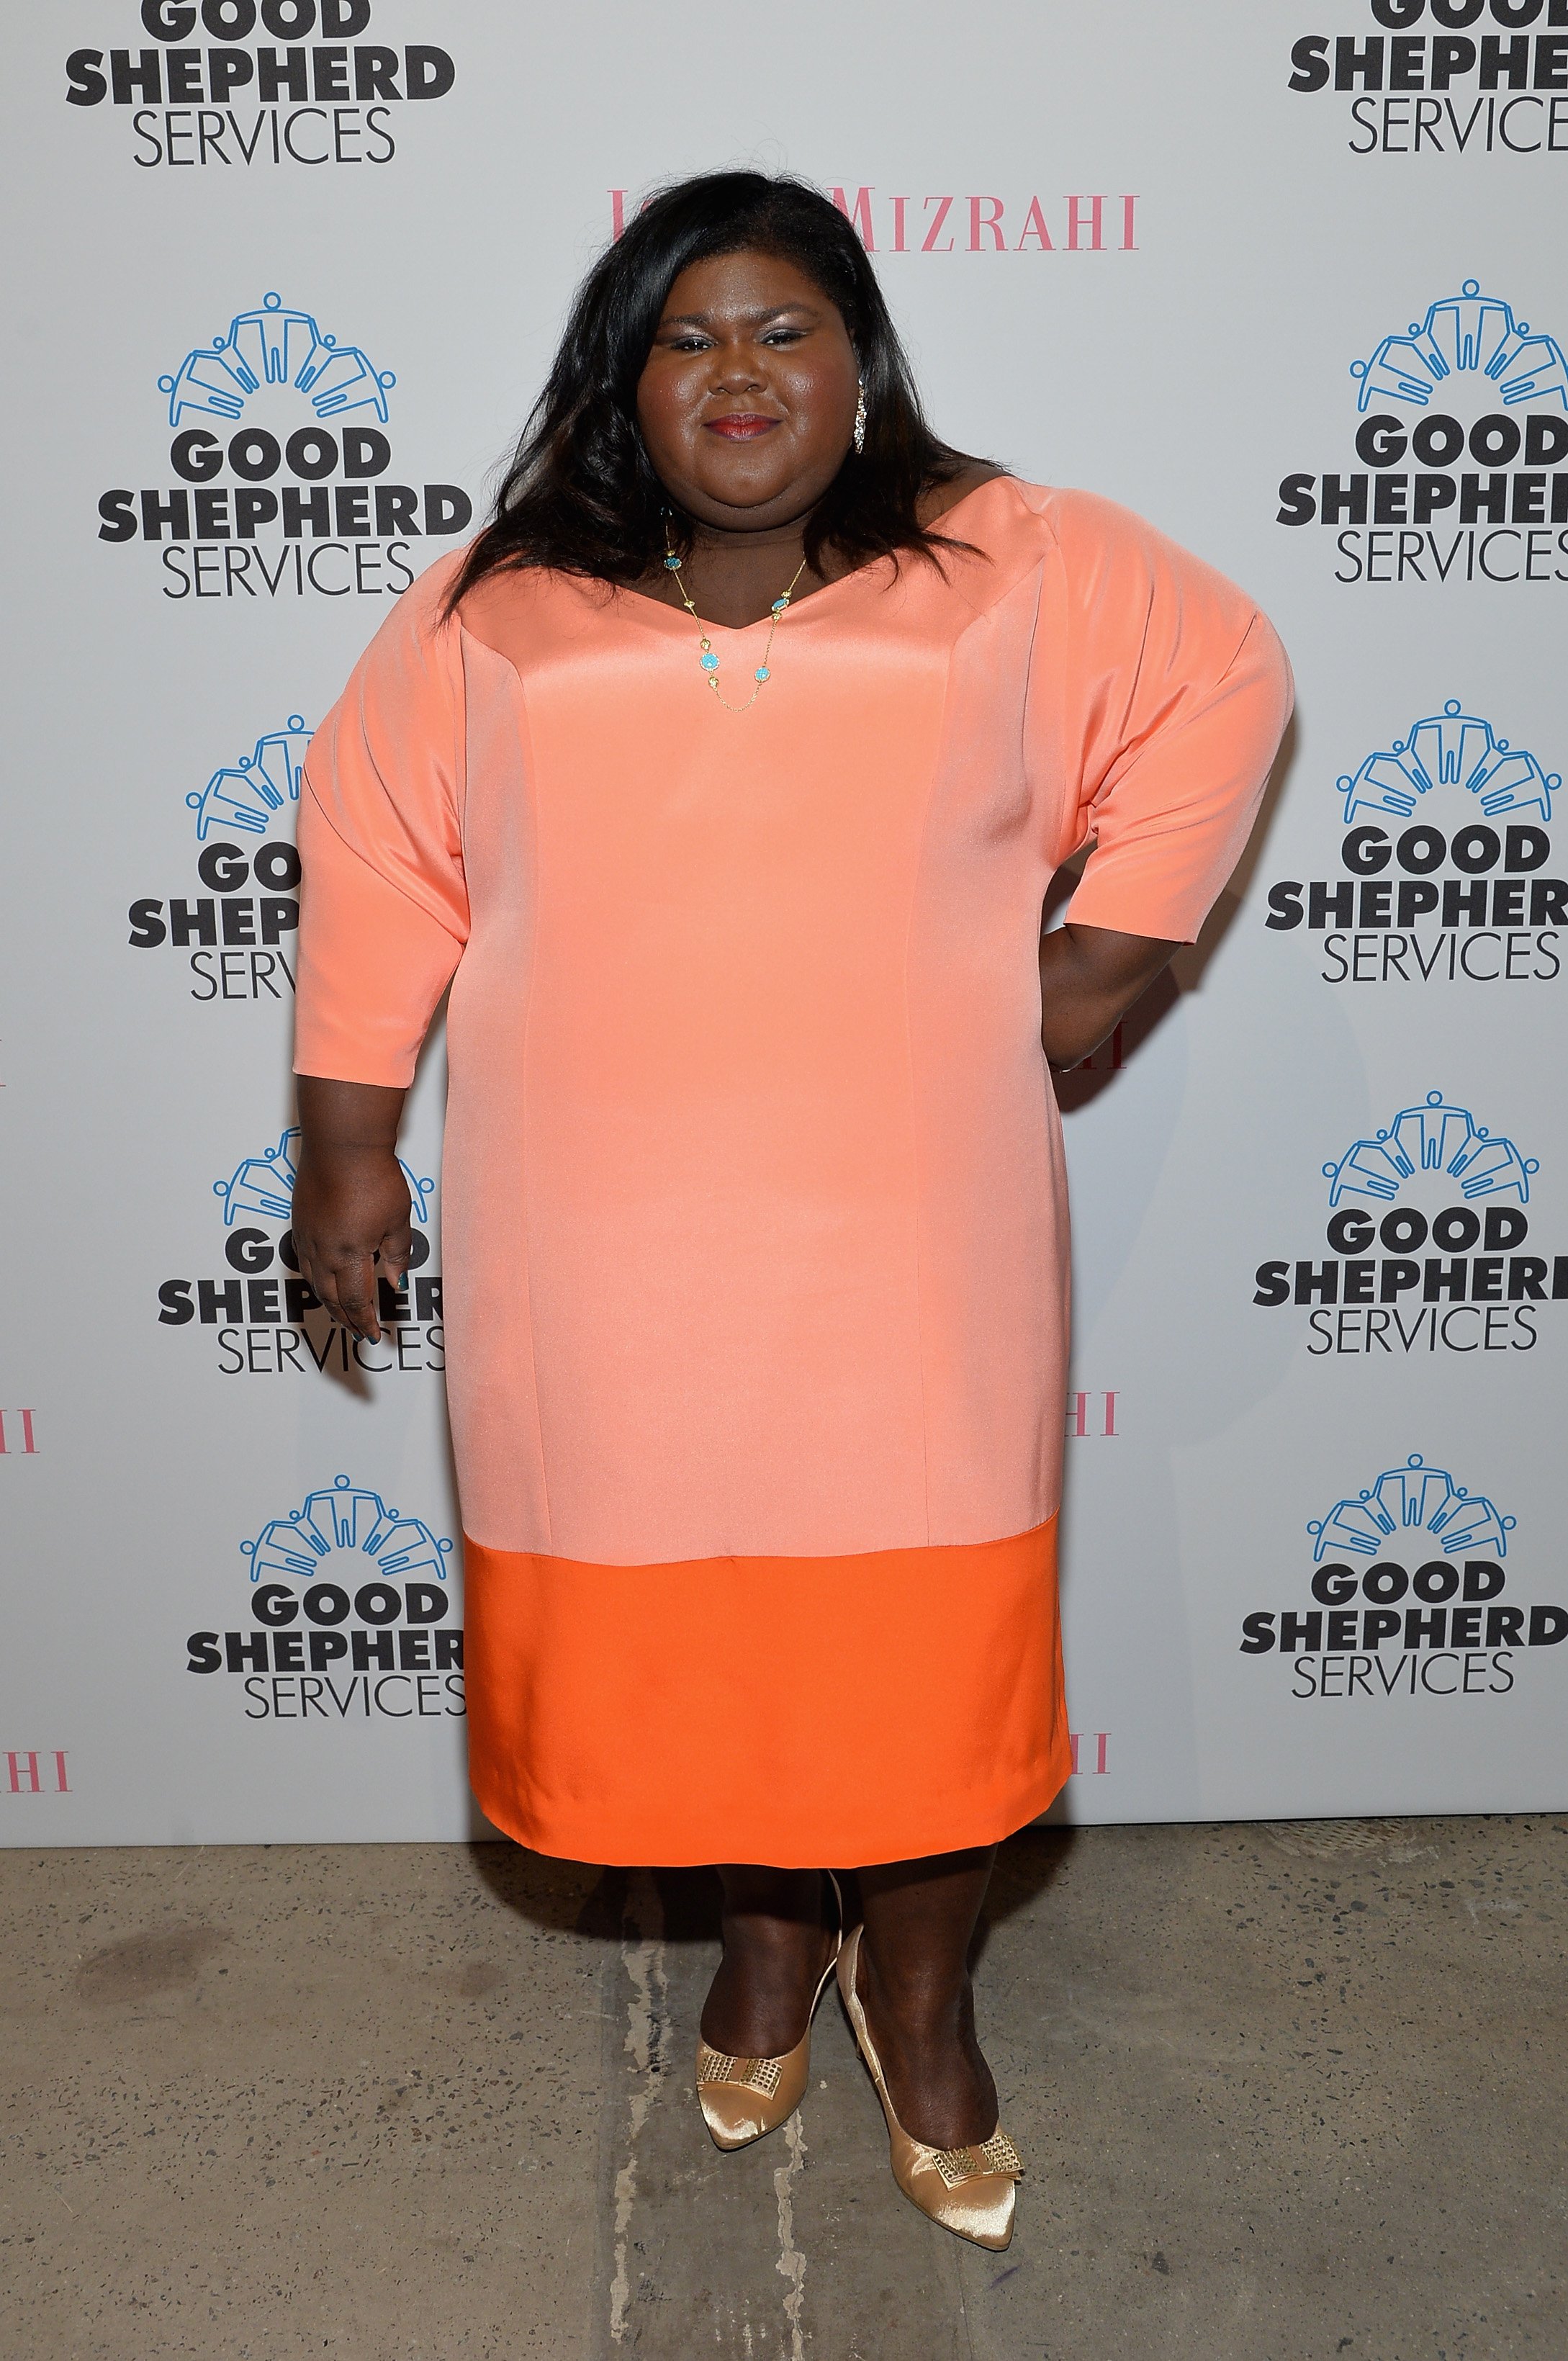 Gabourey Sidibe at the Good Shepherd Services Spring Party in New York City on April 24, 2014 | Photo: Getty Images